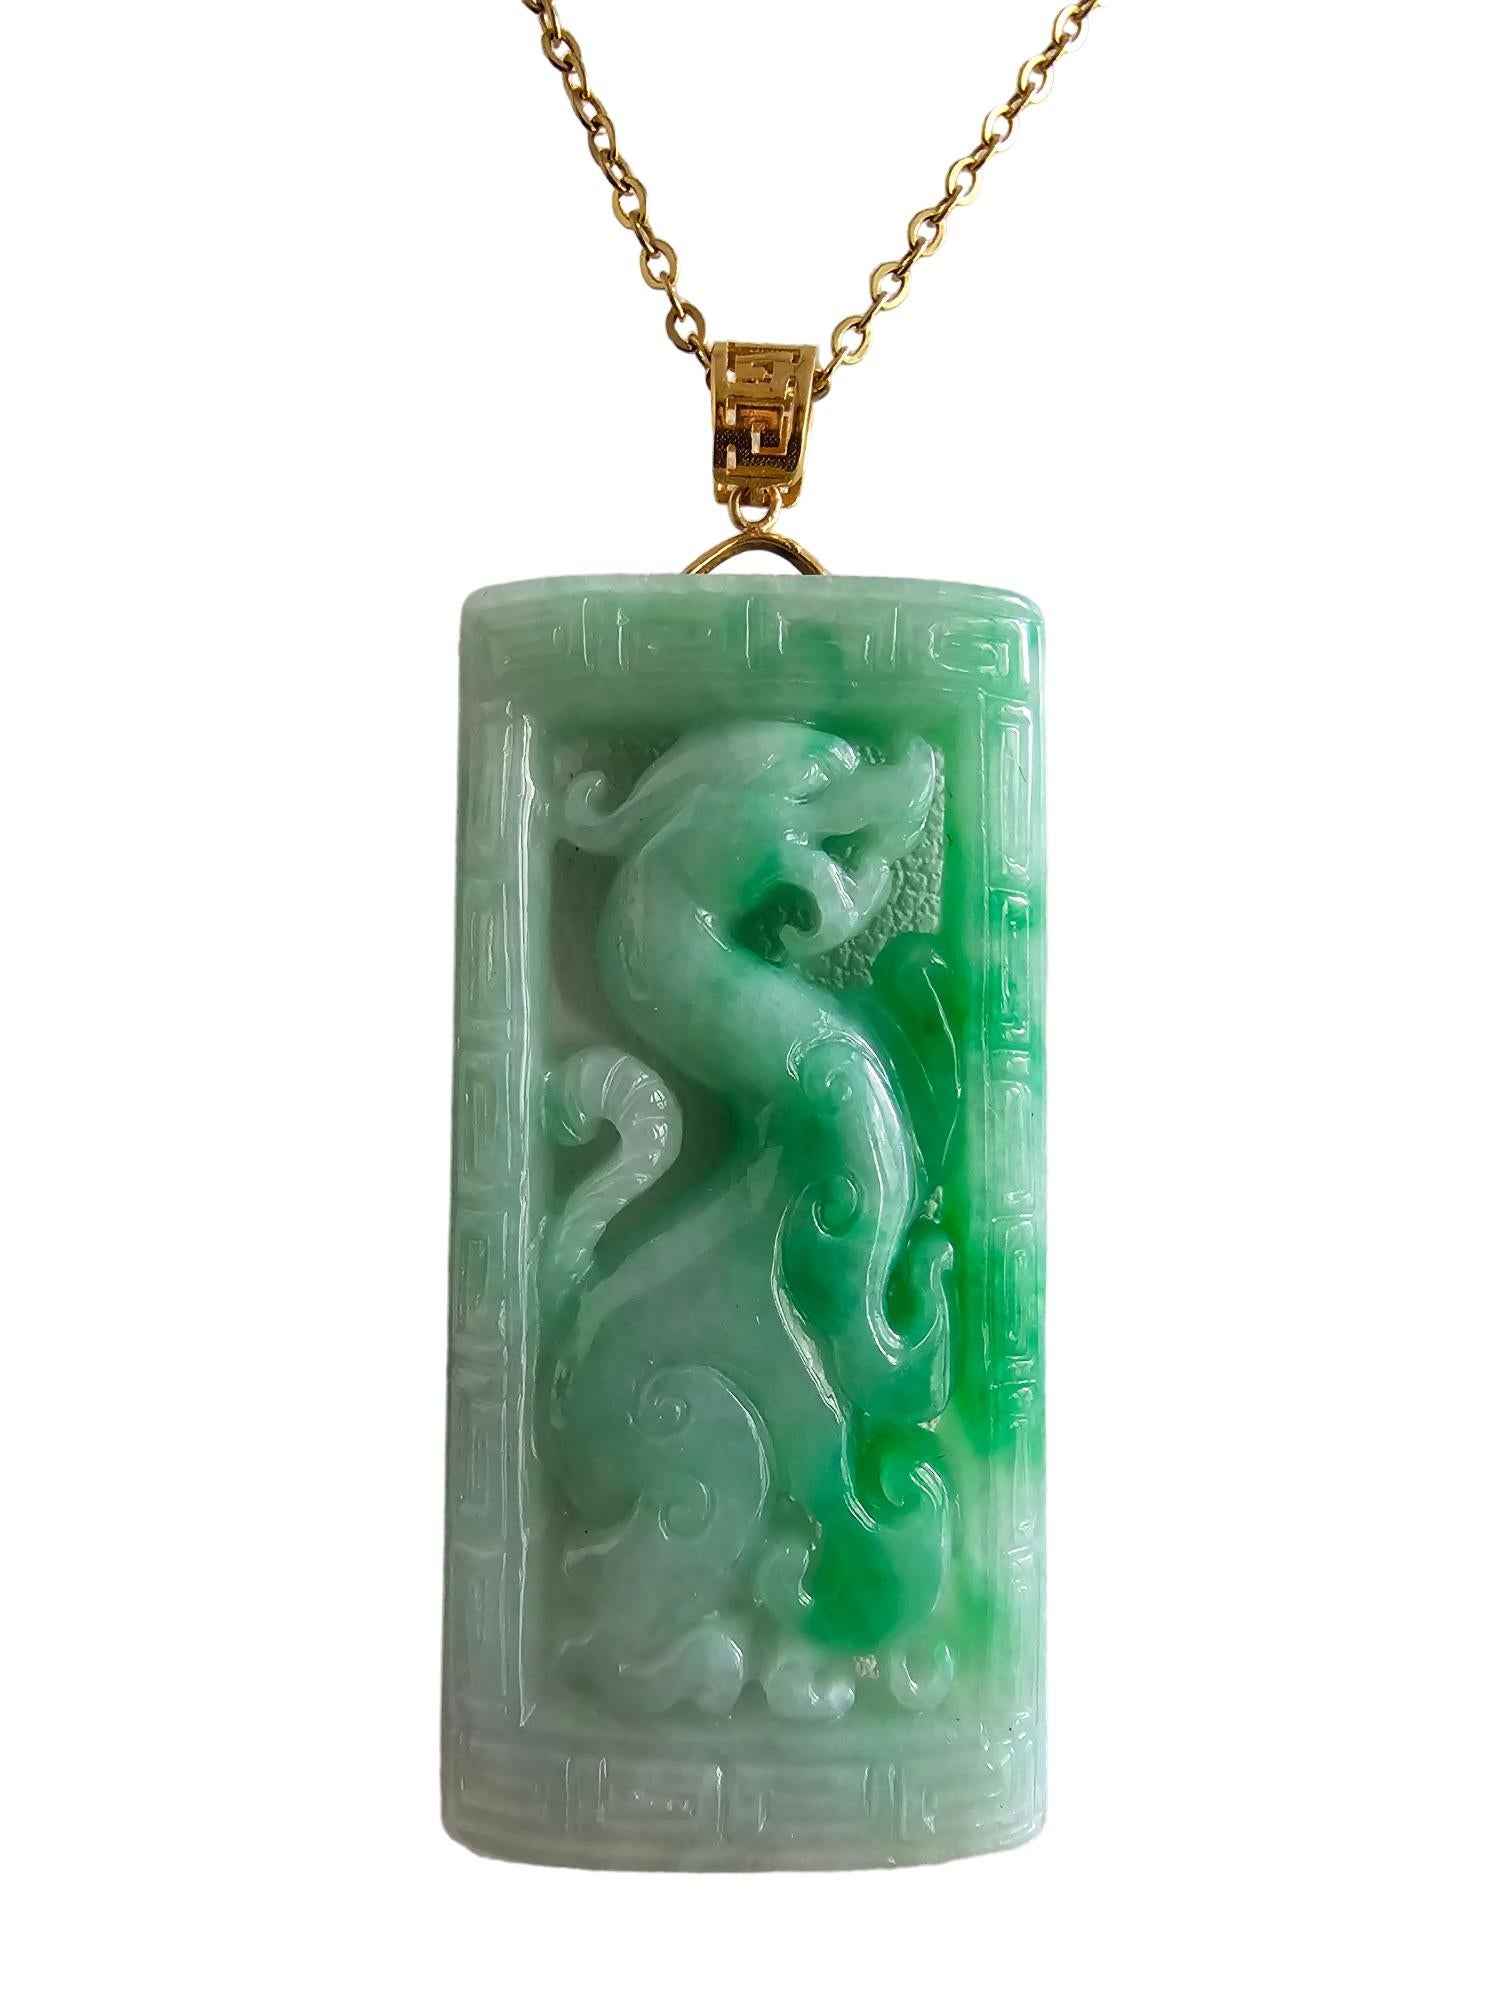 Enchanted Dragon Imperial Burmese A-Jade Jadeite Pendant with 18K Yellow Gold For Sale 7